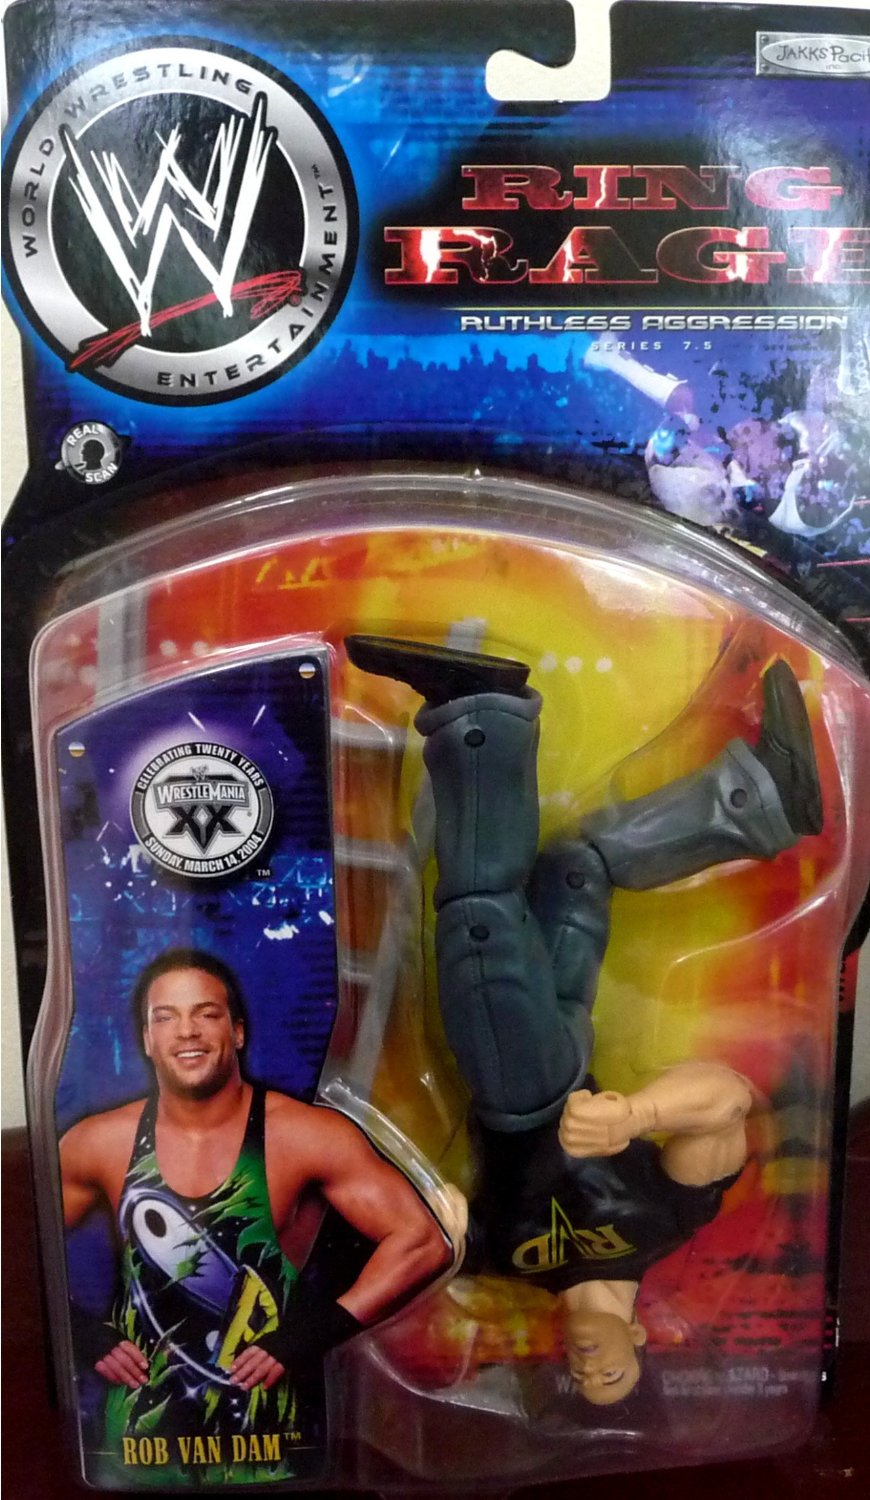 http://img3.wikia.nocookie.net/__cb20130424234742/prowrestling/images/f/f4/WWE_Ruthless_Aggression_7.5_Rob_Van_Dam.jpg